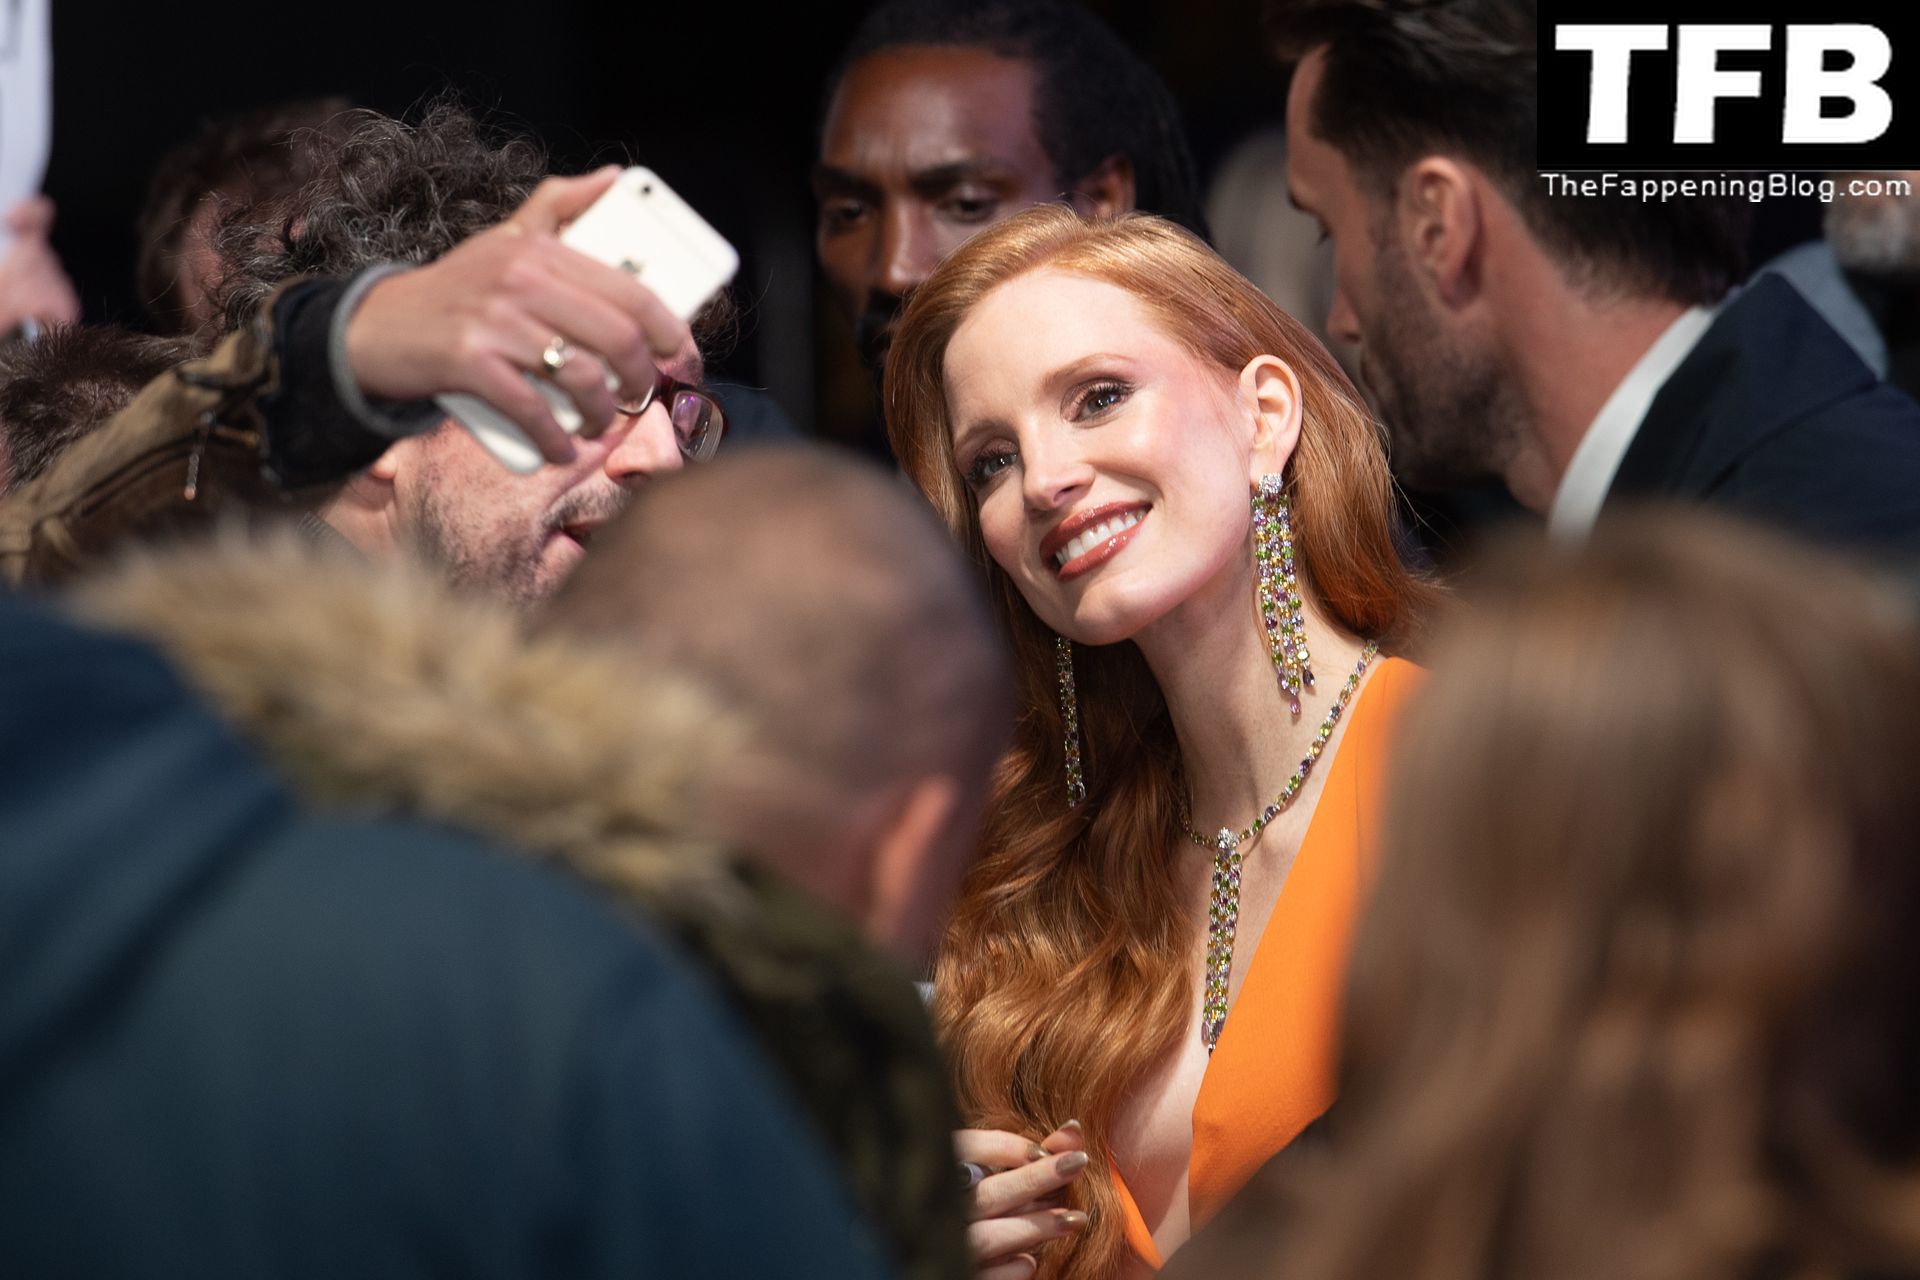 Jessica Chastain Sexy The Fappening Blog 88 - Jessica Chastain Poses for Photographers Upon Arrival for the Premiere of the Film “The Good Nurse” in London (150 Photos)